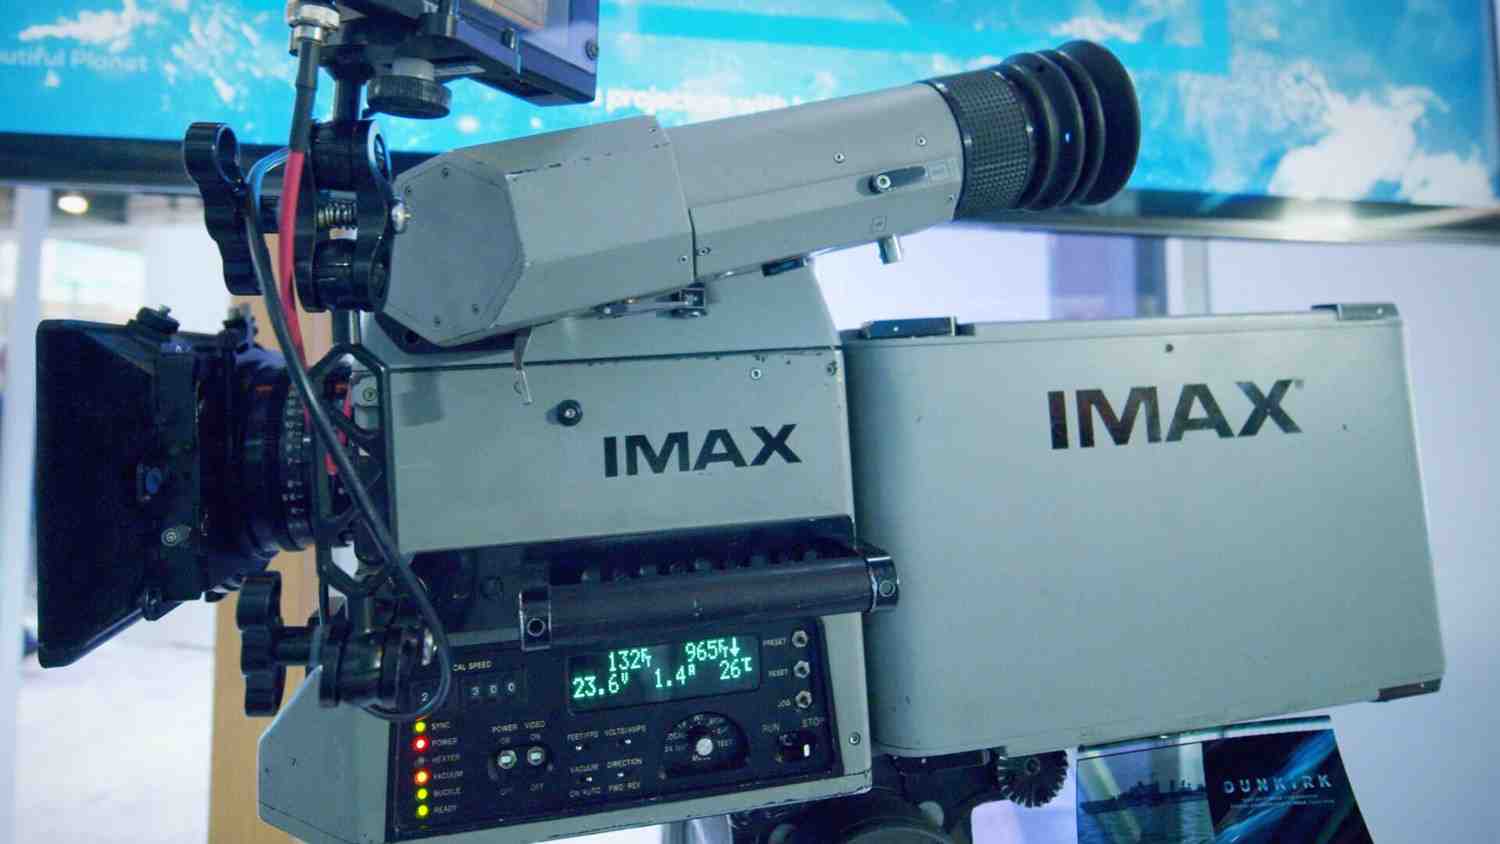 An IMAX Film Camera that uses films to capture images and shooting from these gives you "Shot with IMAX Film Cameras" title